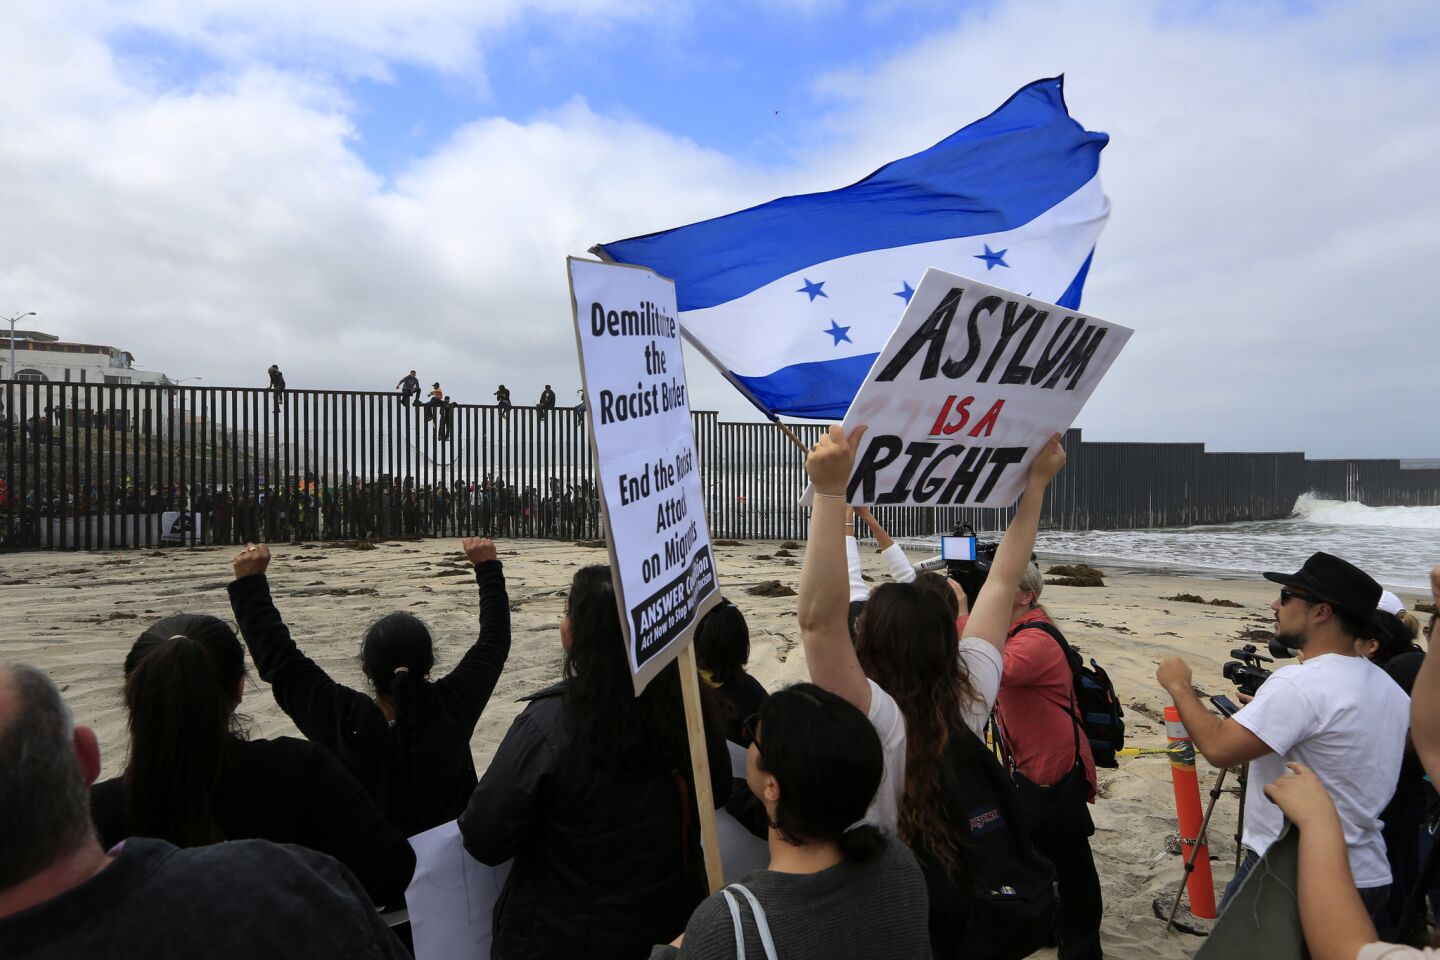 Groups on both sides of the border rally Sunday before immigrants from the caravan across Mexico were to seek asylum at the border with the U.S.